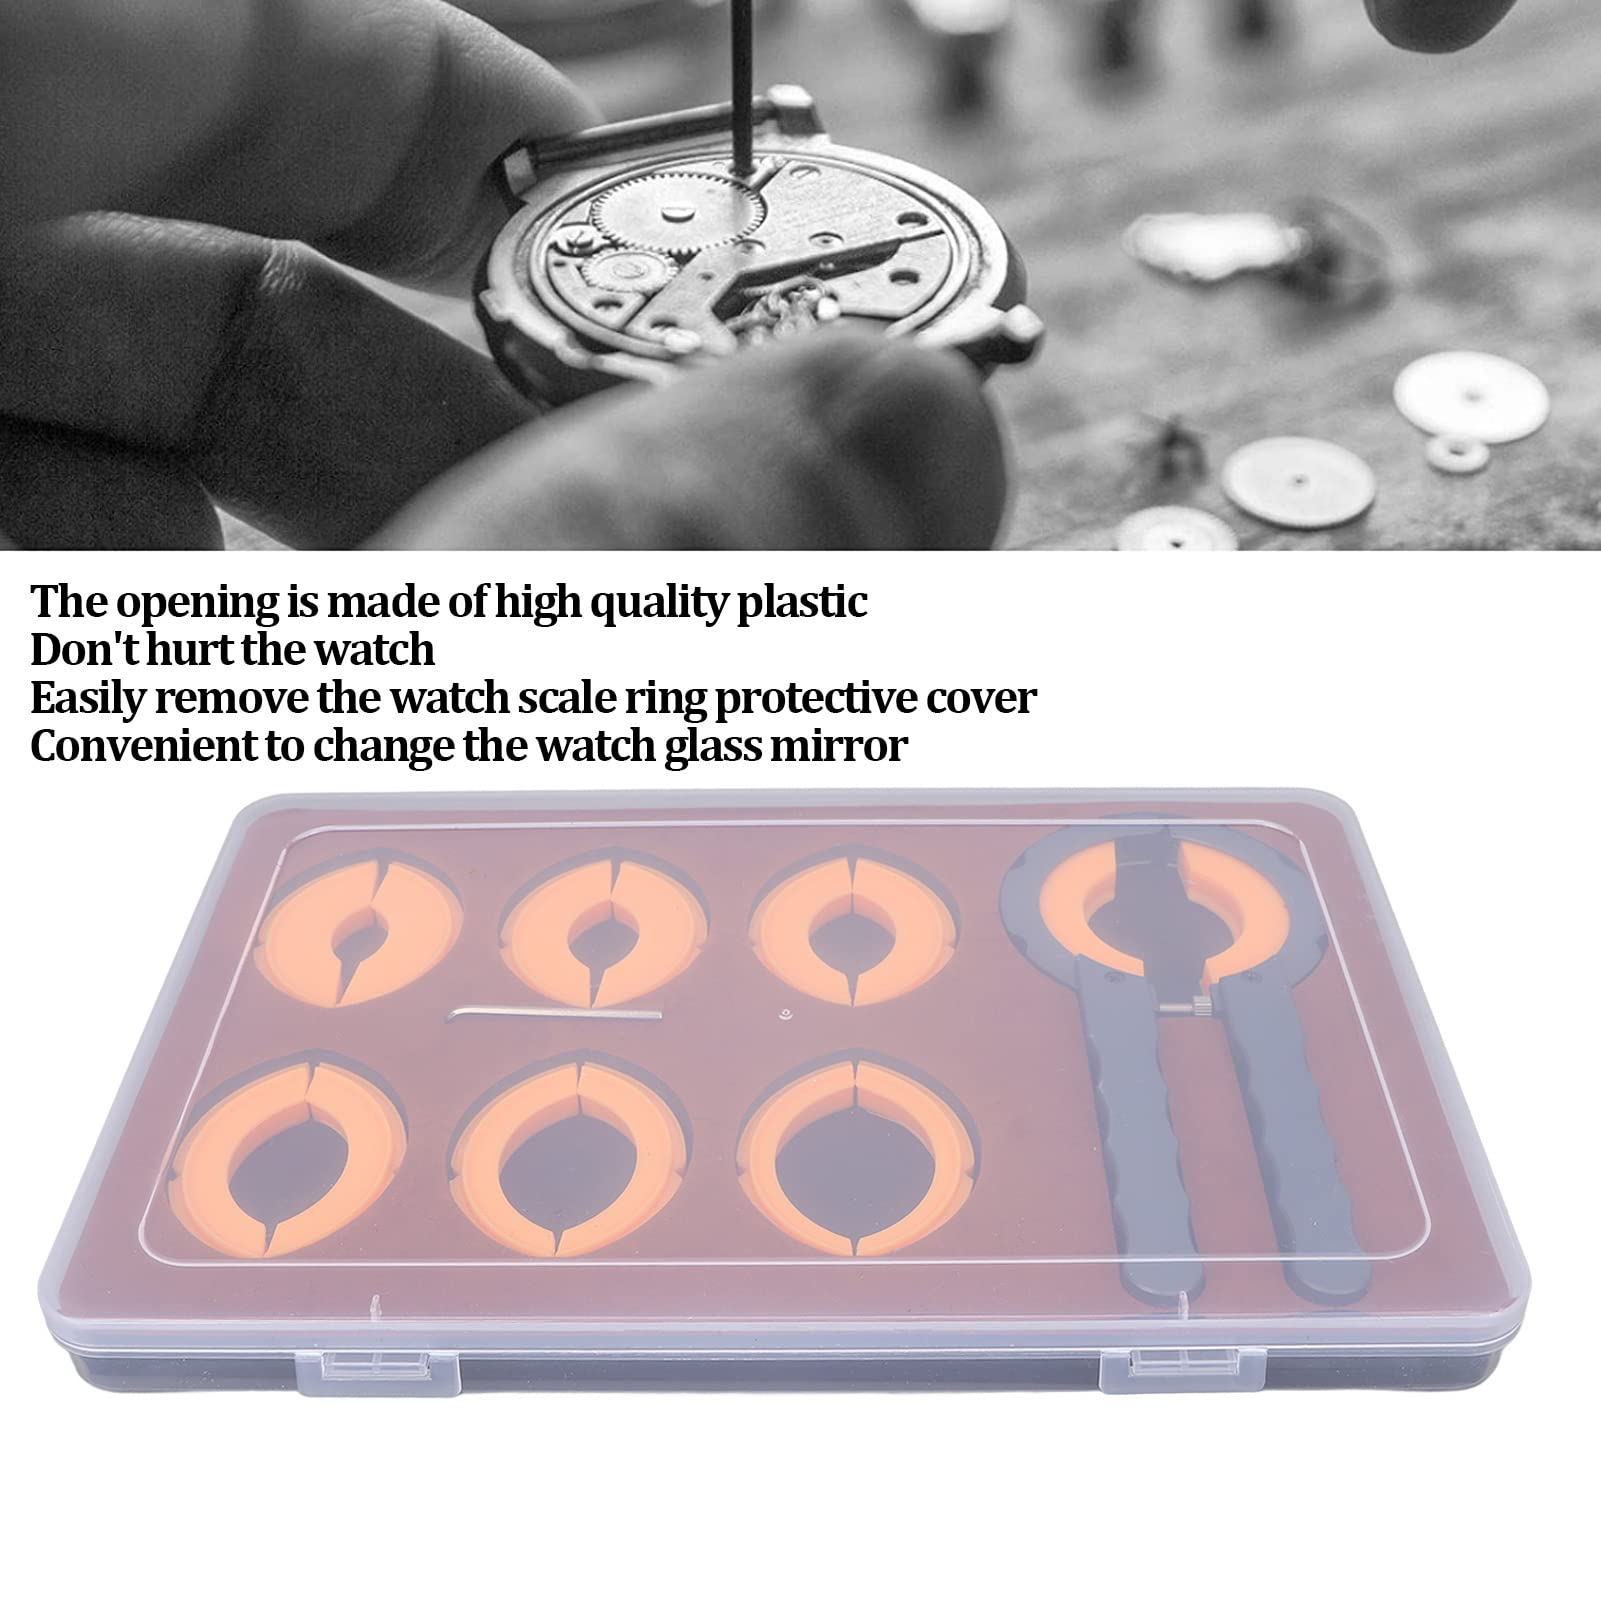 Watch Bezel Ring Opener Kit - Professional Alloy Watch Bezel Remover Watch Repair Tool Kit with Plastic Storage Box for Watchmakers Watch Repairing Protective Cover Removal